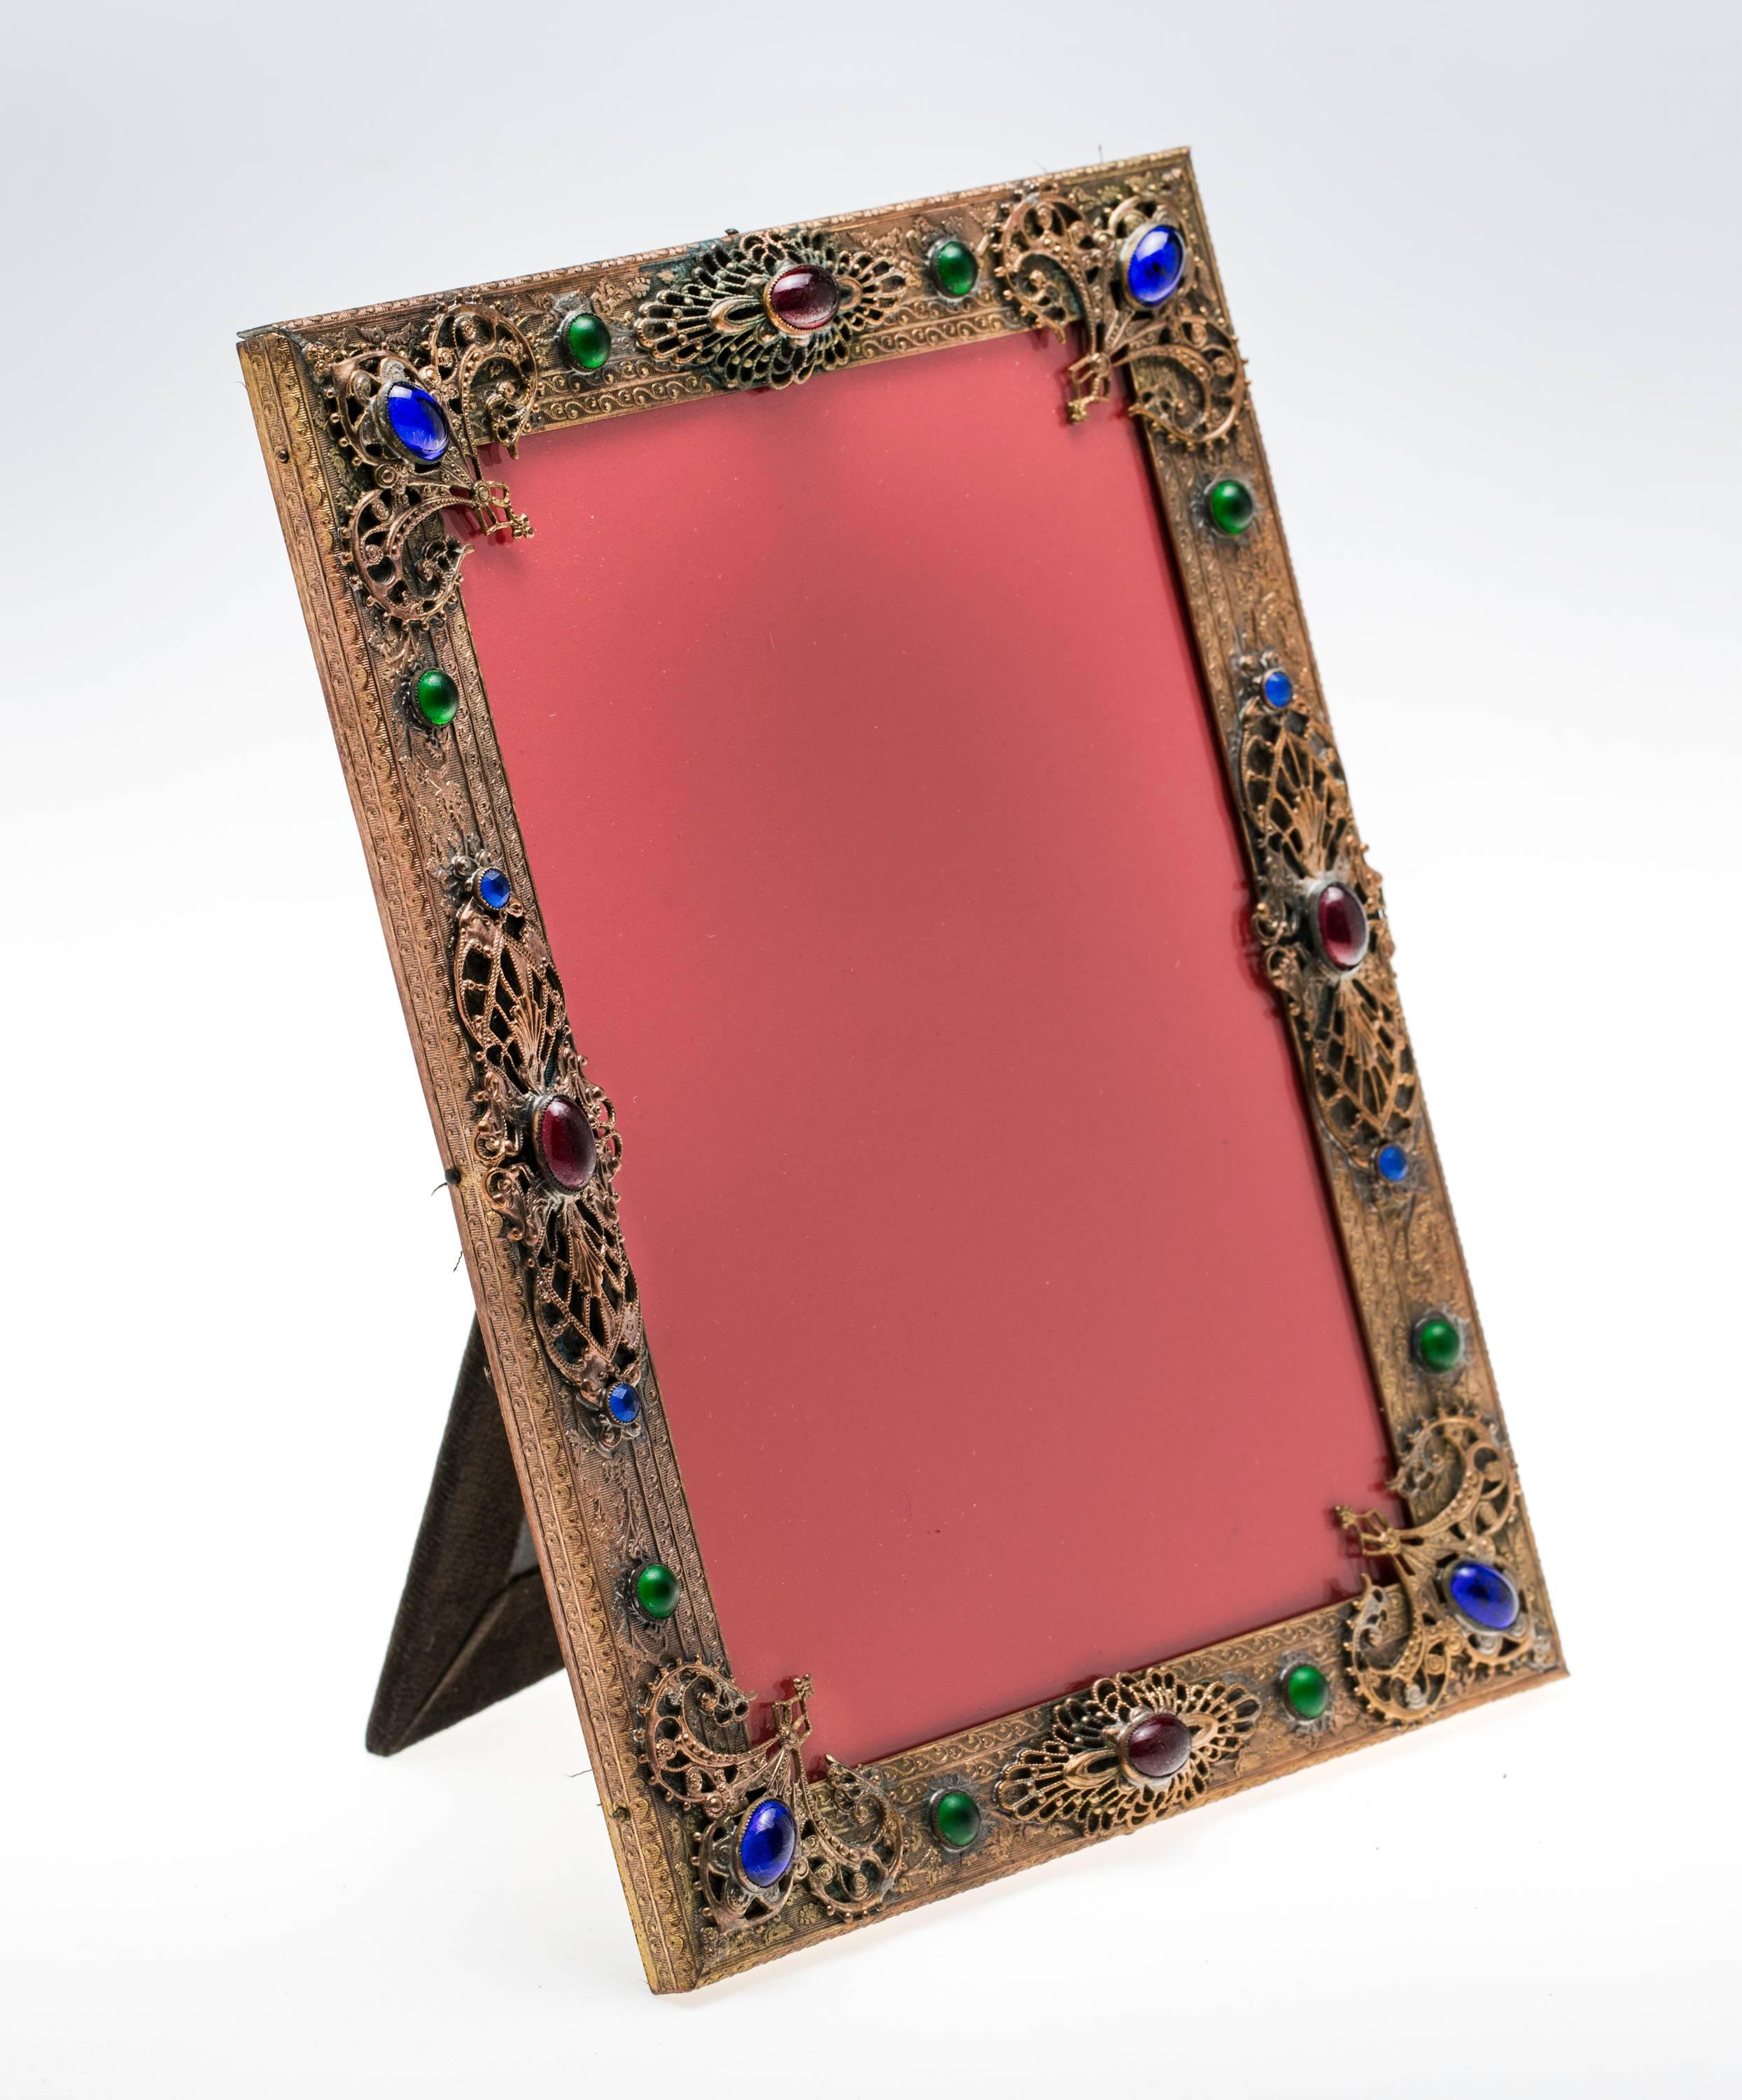 Bejeweled decoratively with green, blue and amber glass cabochons over gilt bronze filigree picture frame. Great for 5 x 7 photo picture.